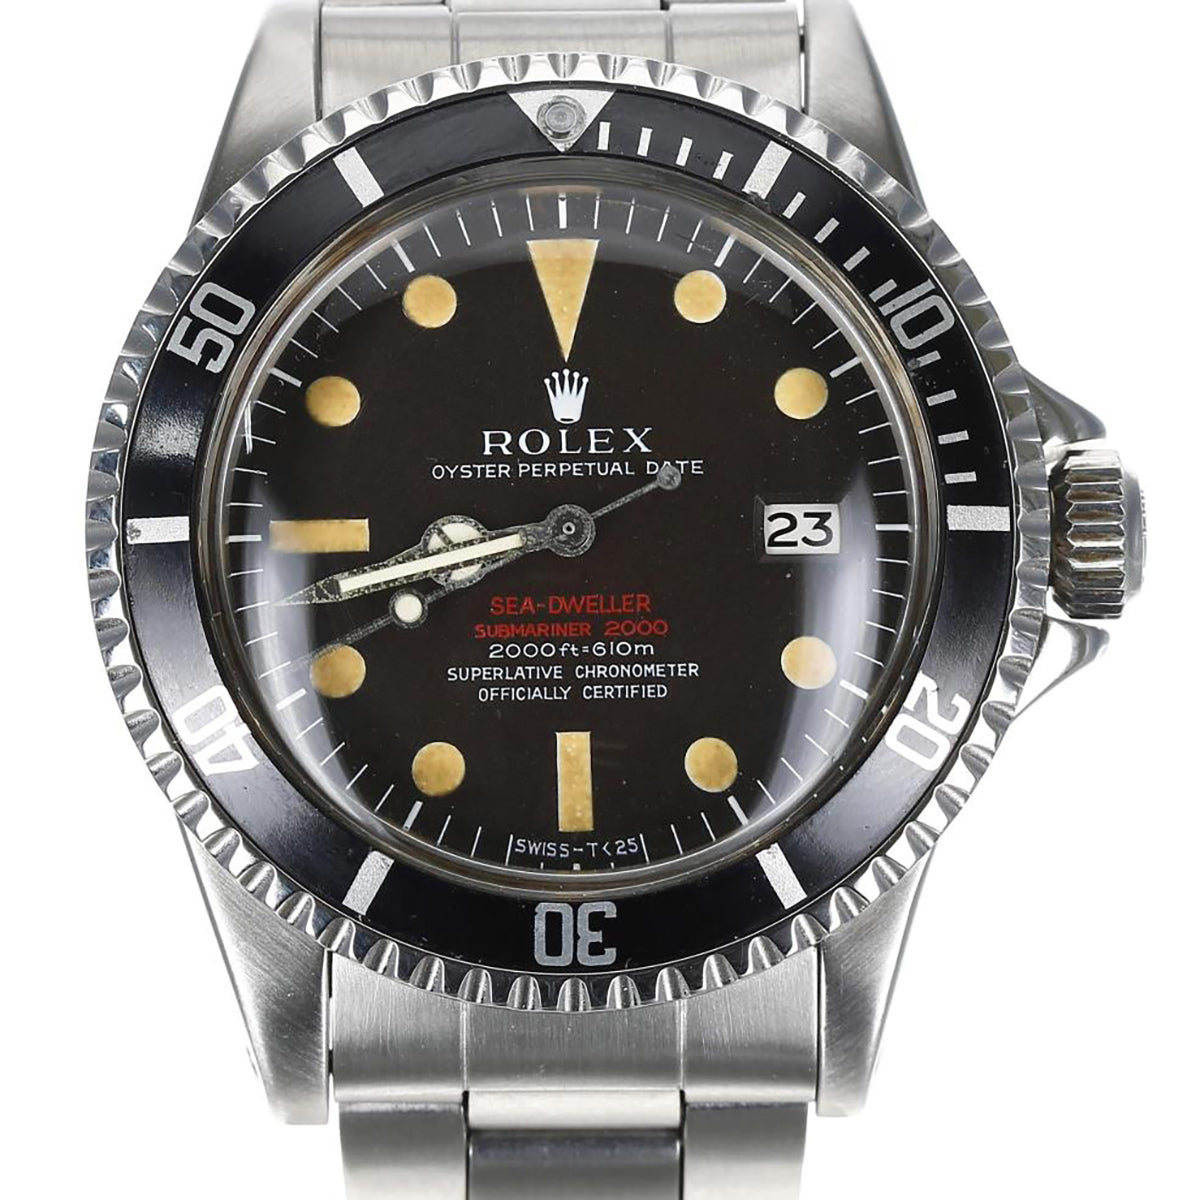 Classic vintage diver wristwatch, ‘Double Red’ Rolex Oyster Perpetual Date Sea-Dweller